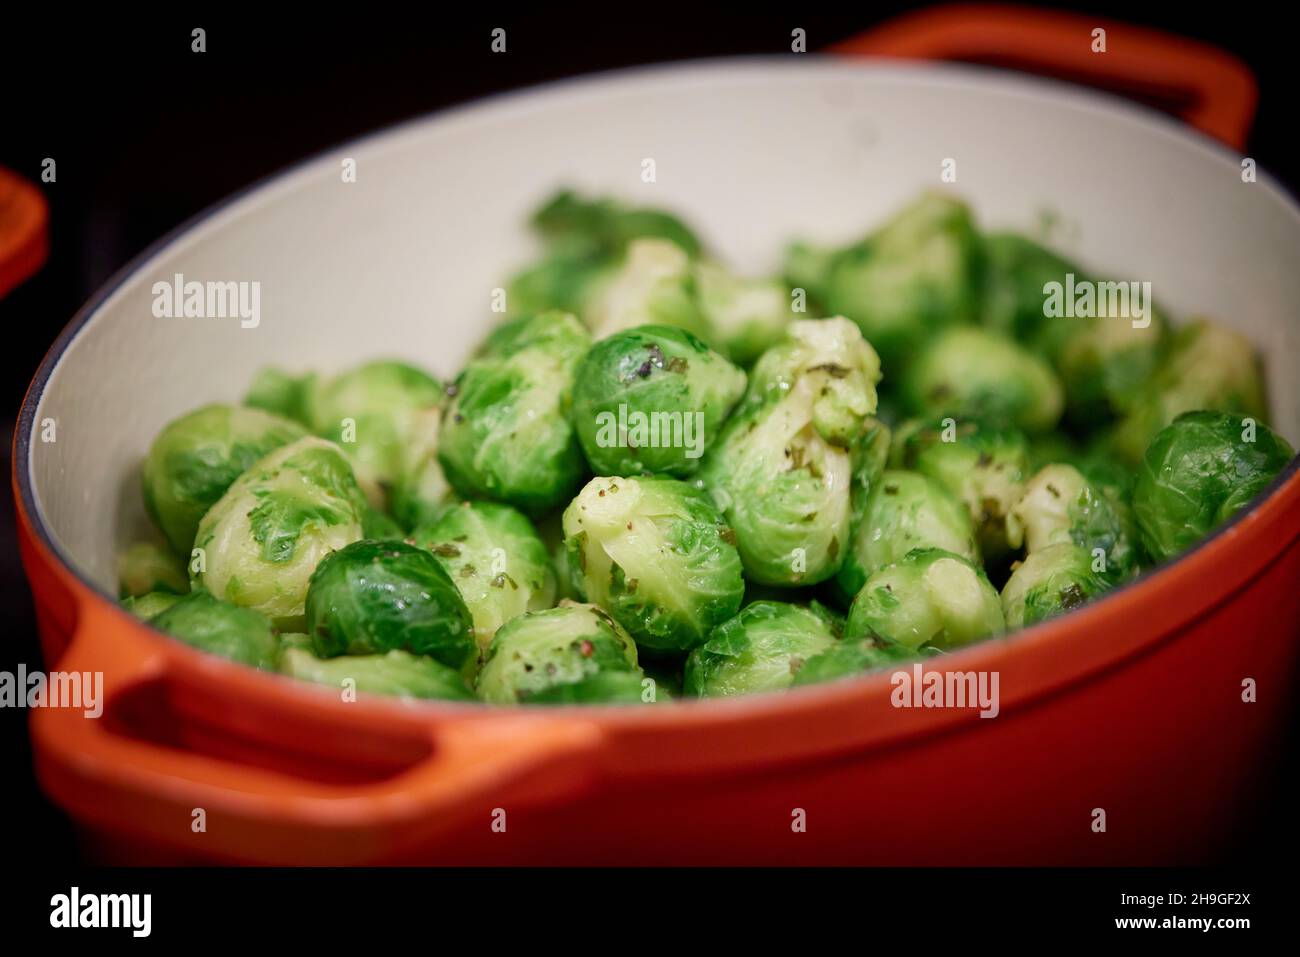 Pub carvery self-service cooking pot of Brussels sprouts Stock Photo